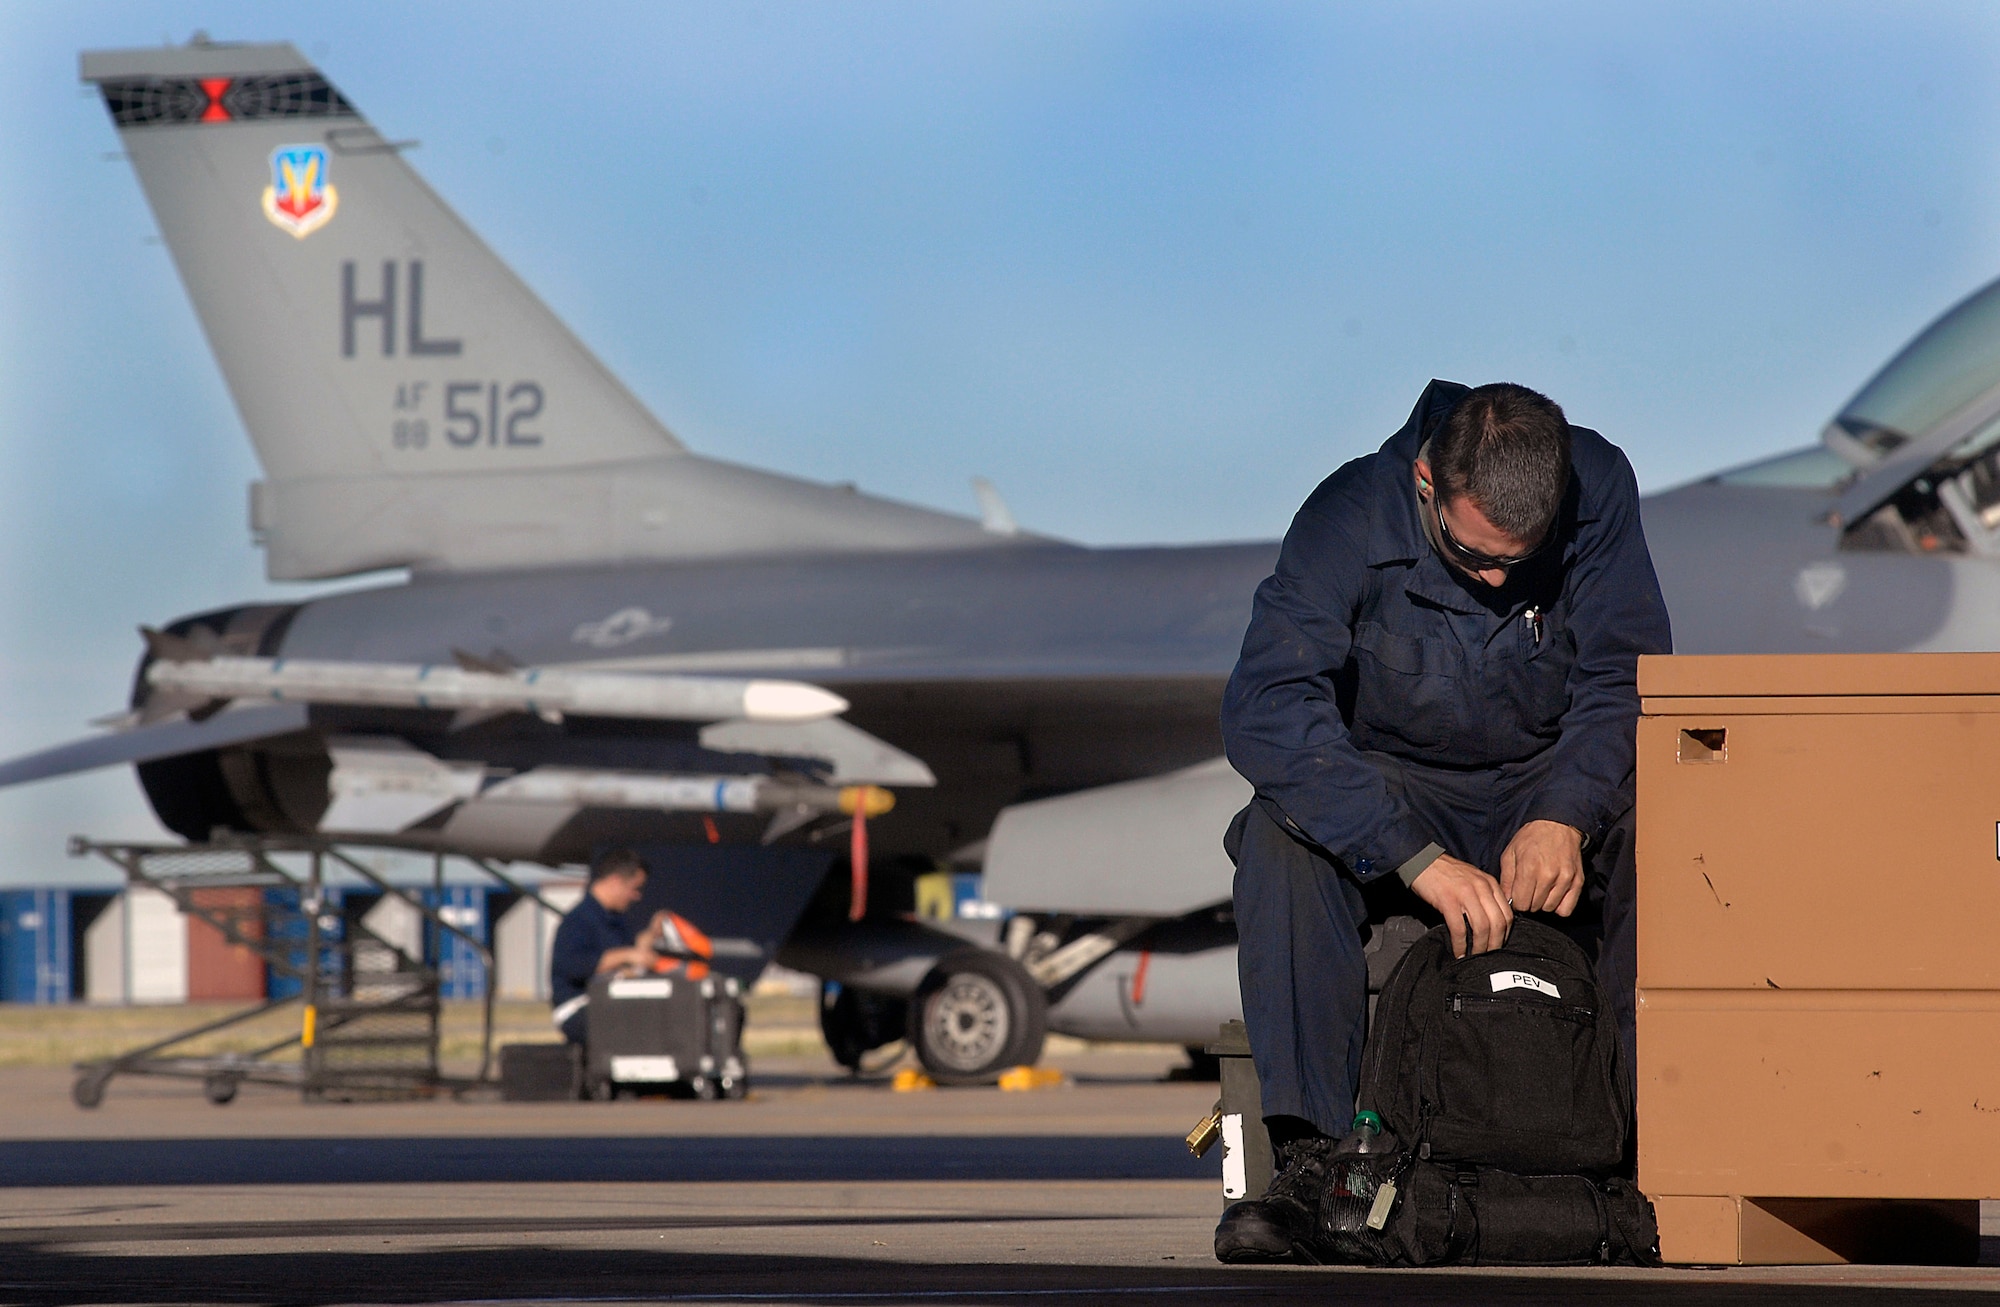 Senior Airman Robert Pevoroff gets ready to prep an F-16 Fighting Falcon for flight Oct. 10 while Staff Sgt. Chris Hatten reviews forms prior to the arrival of the aircrew.  Both crew chiefs are assinged at Hill Air Force Base, Utah., Sergeant Hatten is with the 388th Aircraft Maintenance Squadron and Airman Pevoroff is with the 421st Aircraft Maintenance Squadron. (U.S. Air Force photo/Tech. Sgt. Larry A. Simmons)